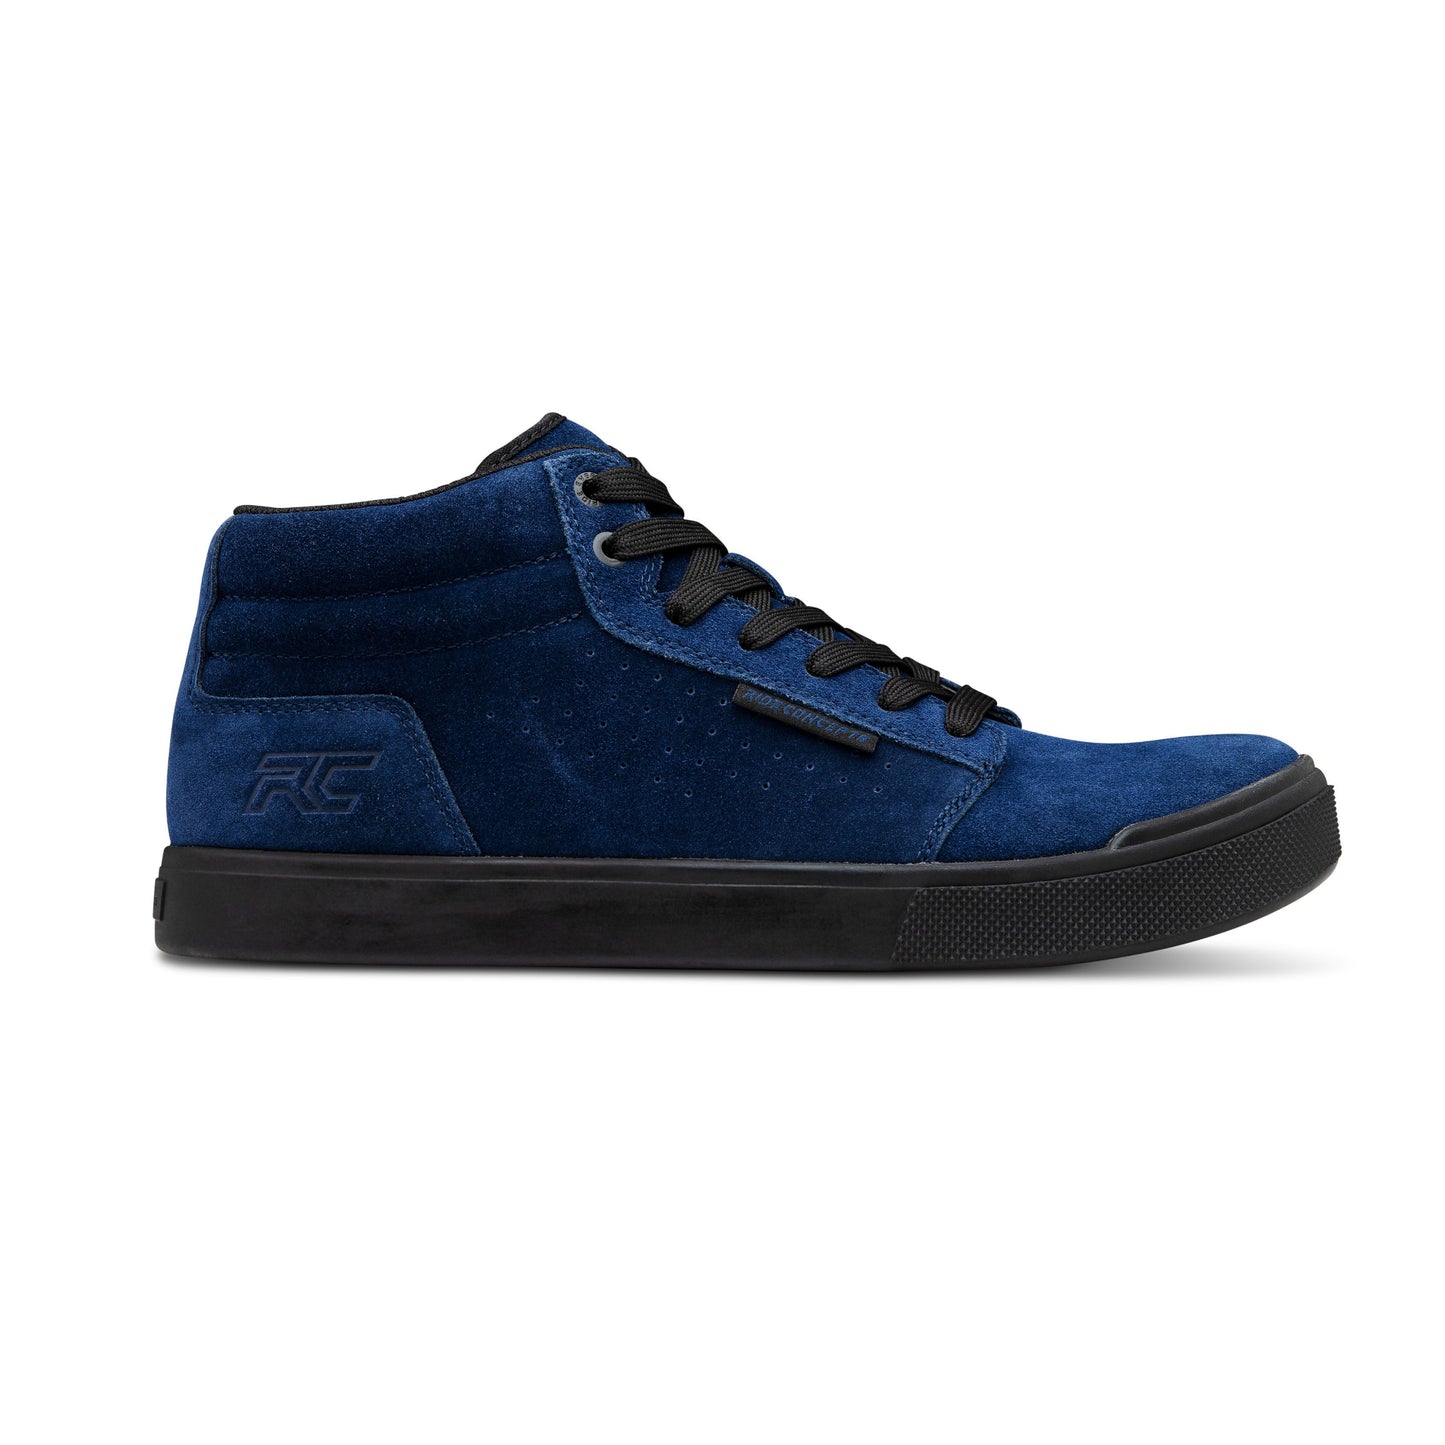 Ride Concepts Vice Mid Shoes Navy / Black